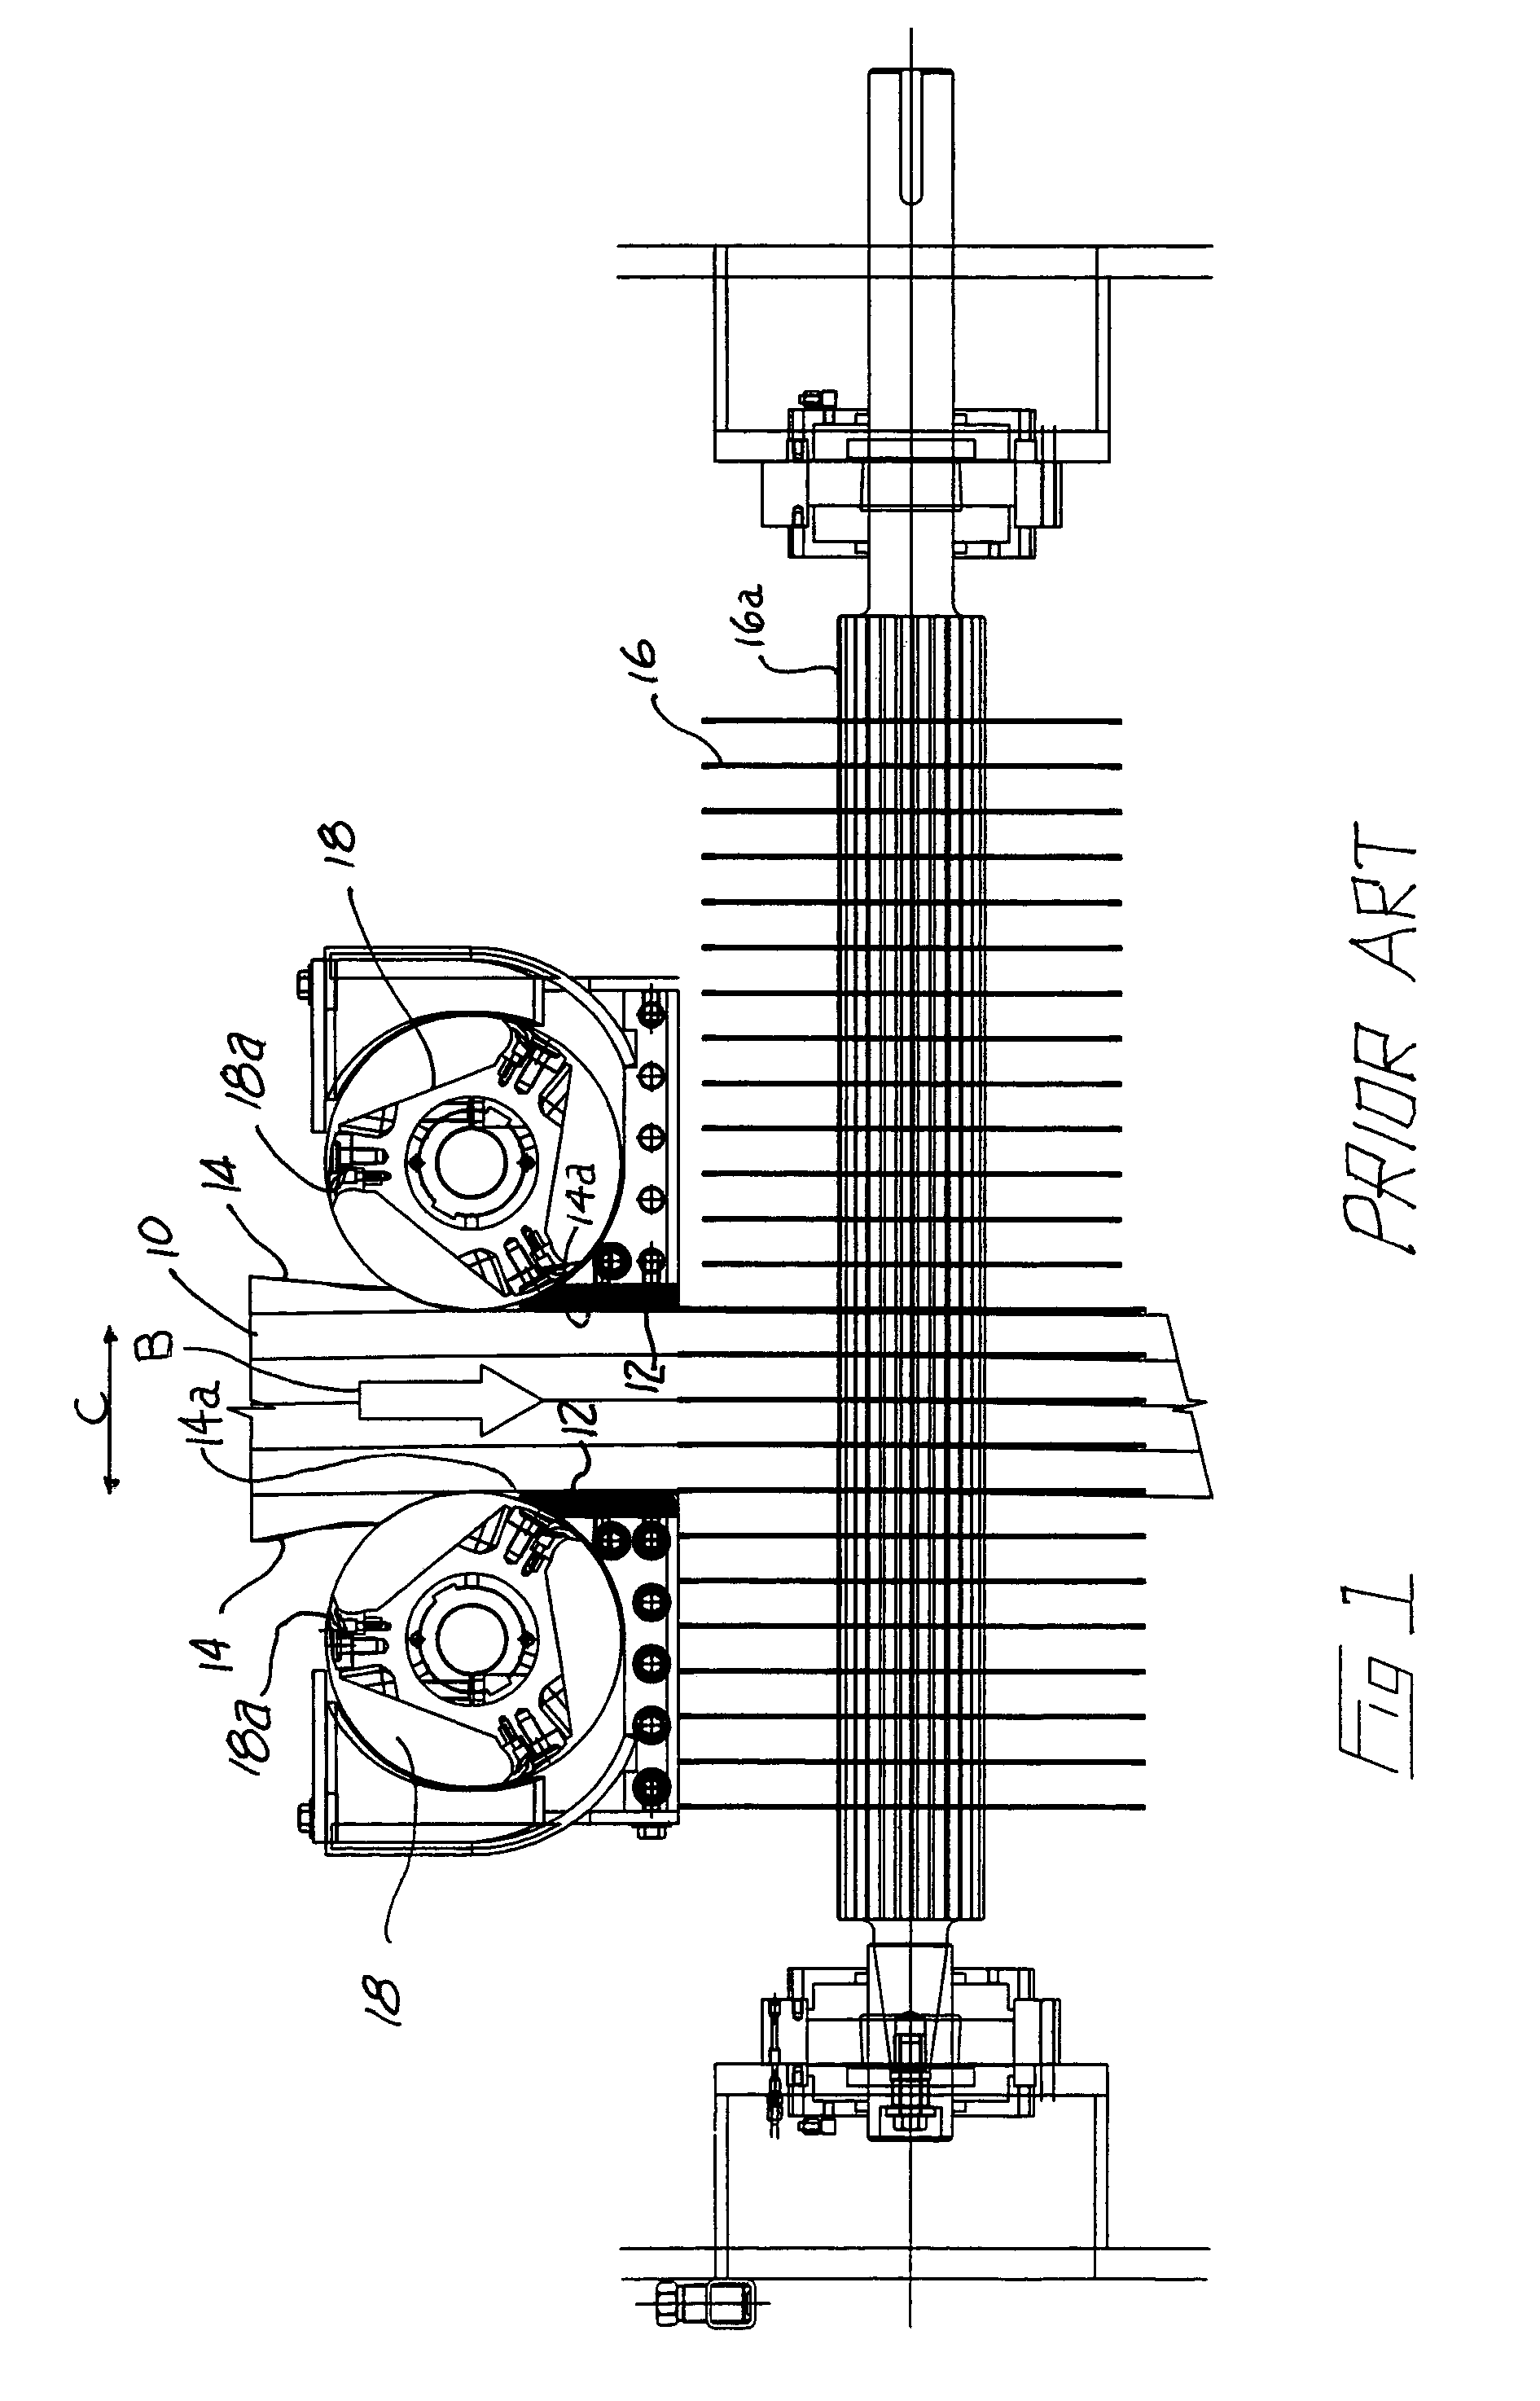 Apparatus for sawing a workpiece